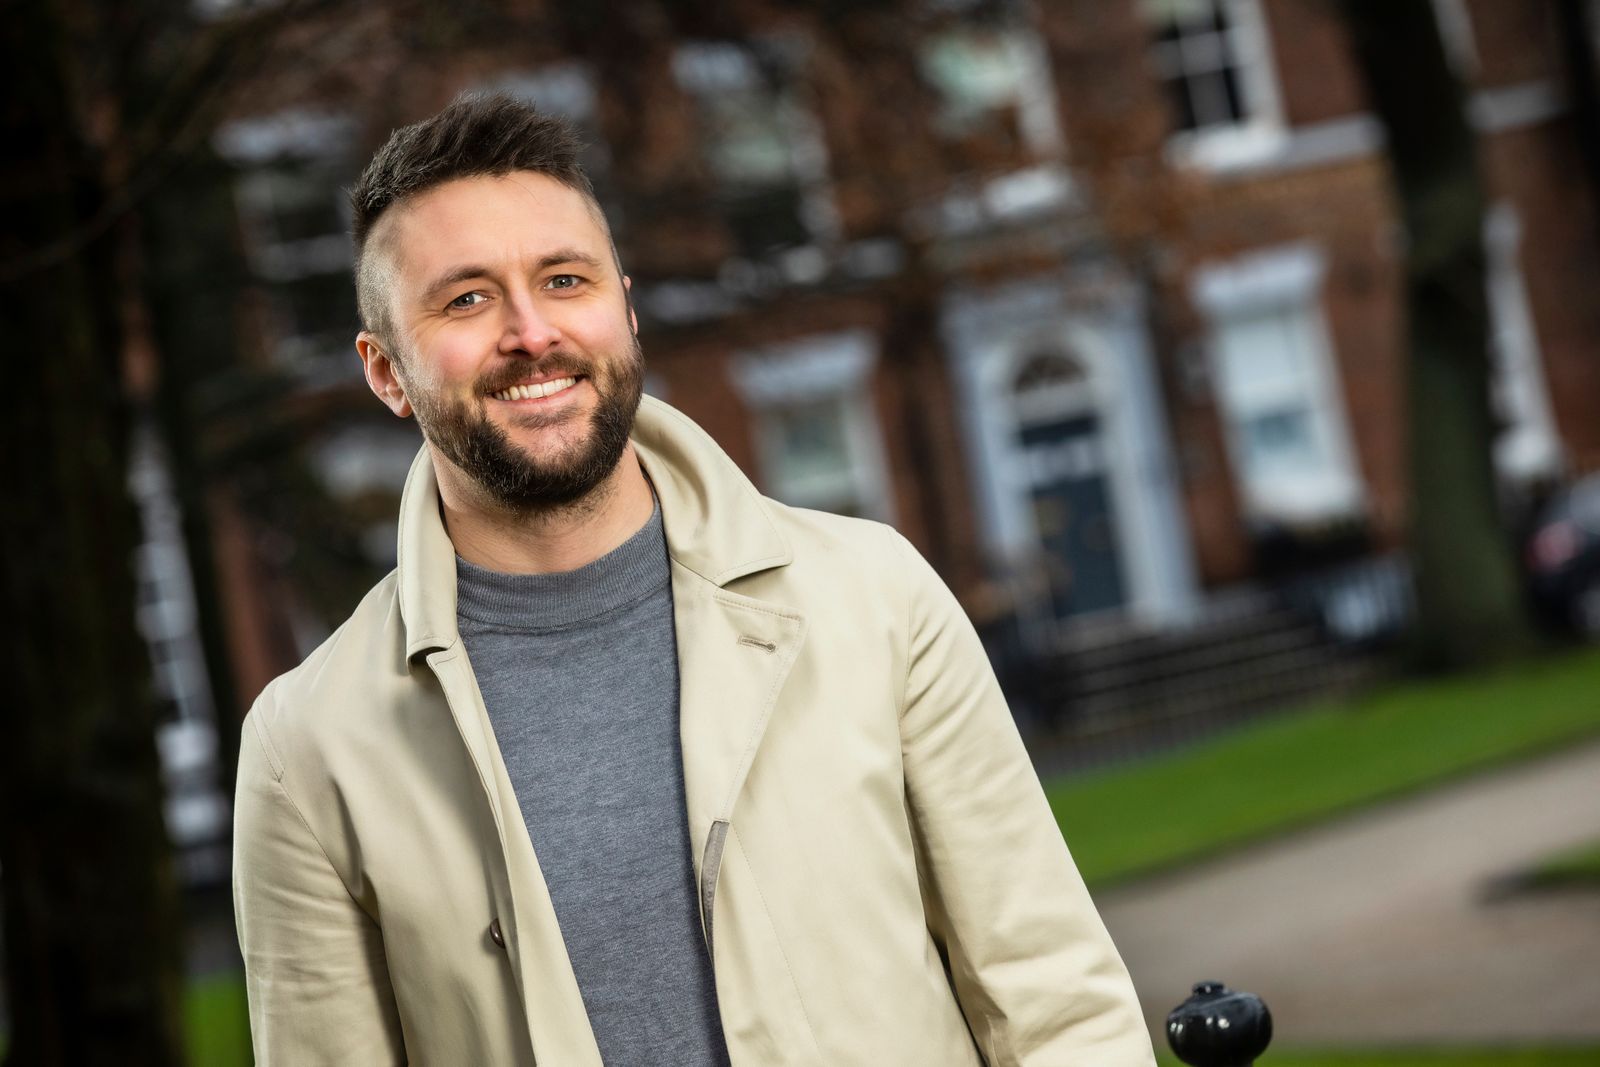 Rising tech entrepreneur invited to help new businesses and start-ups Northern Max Mentor